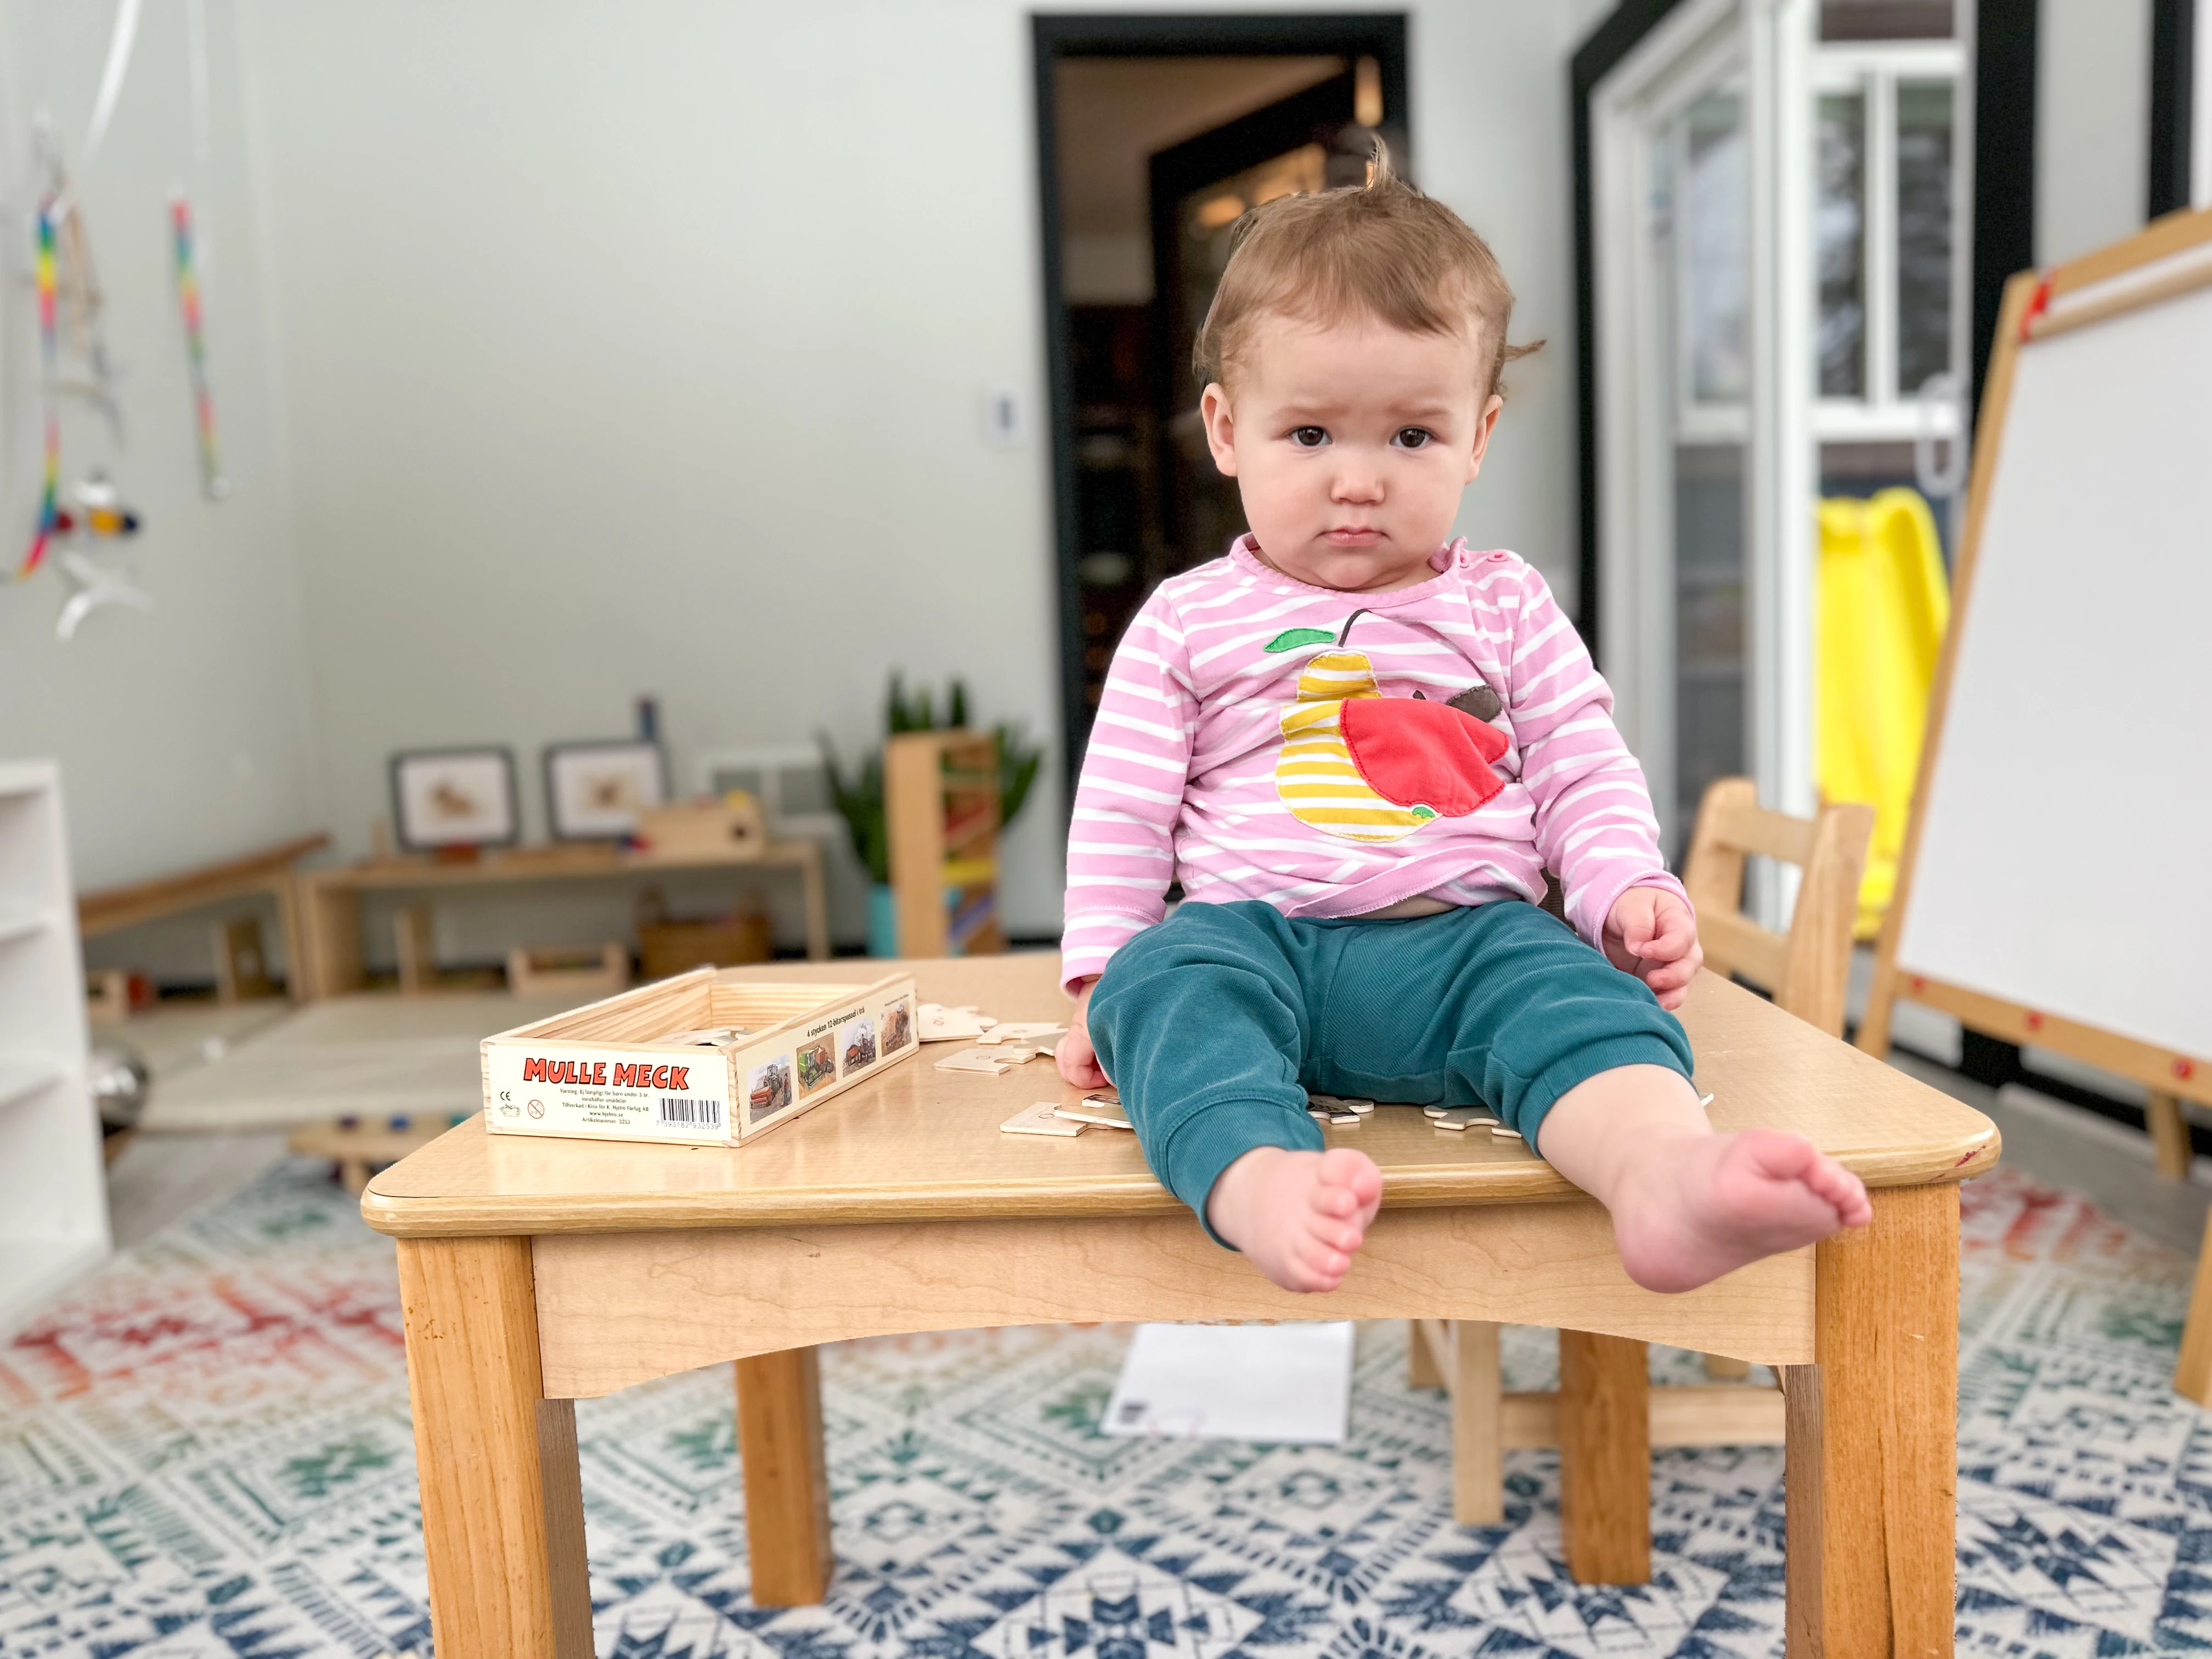 Older Montessori baby sits and looks at camera from on top of a children's table. The background includes her Montessori movement area and playroom.